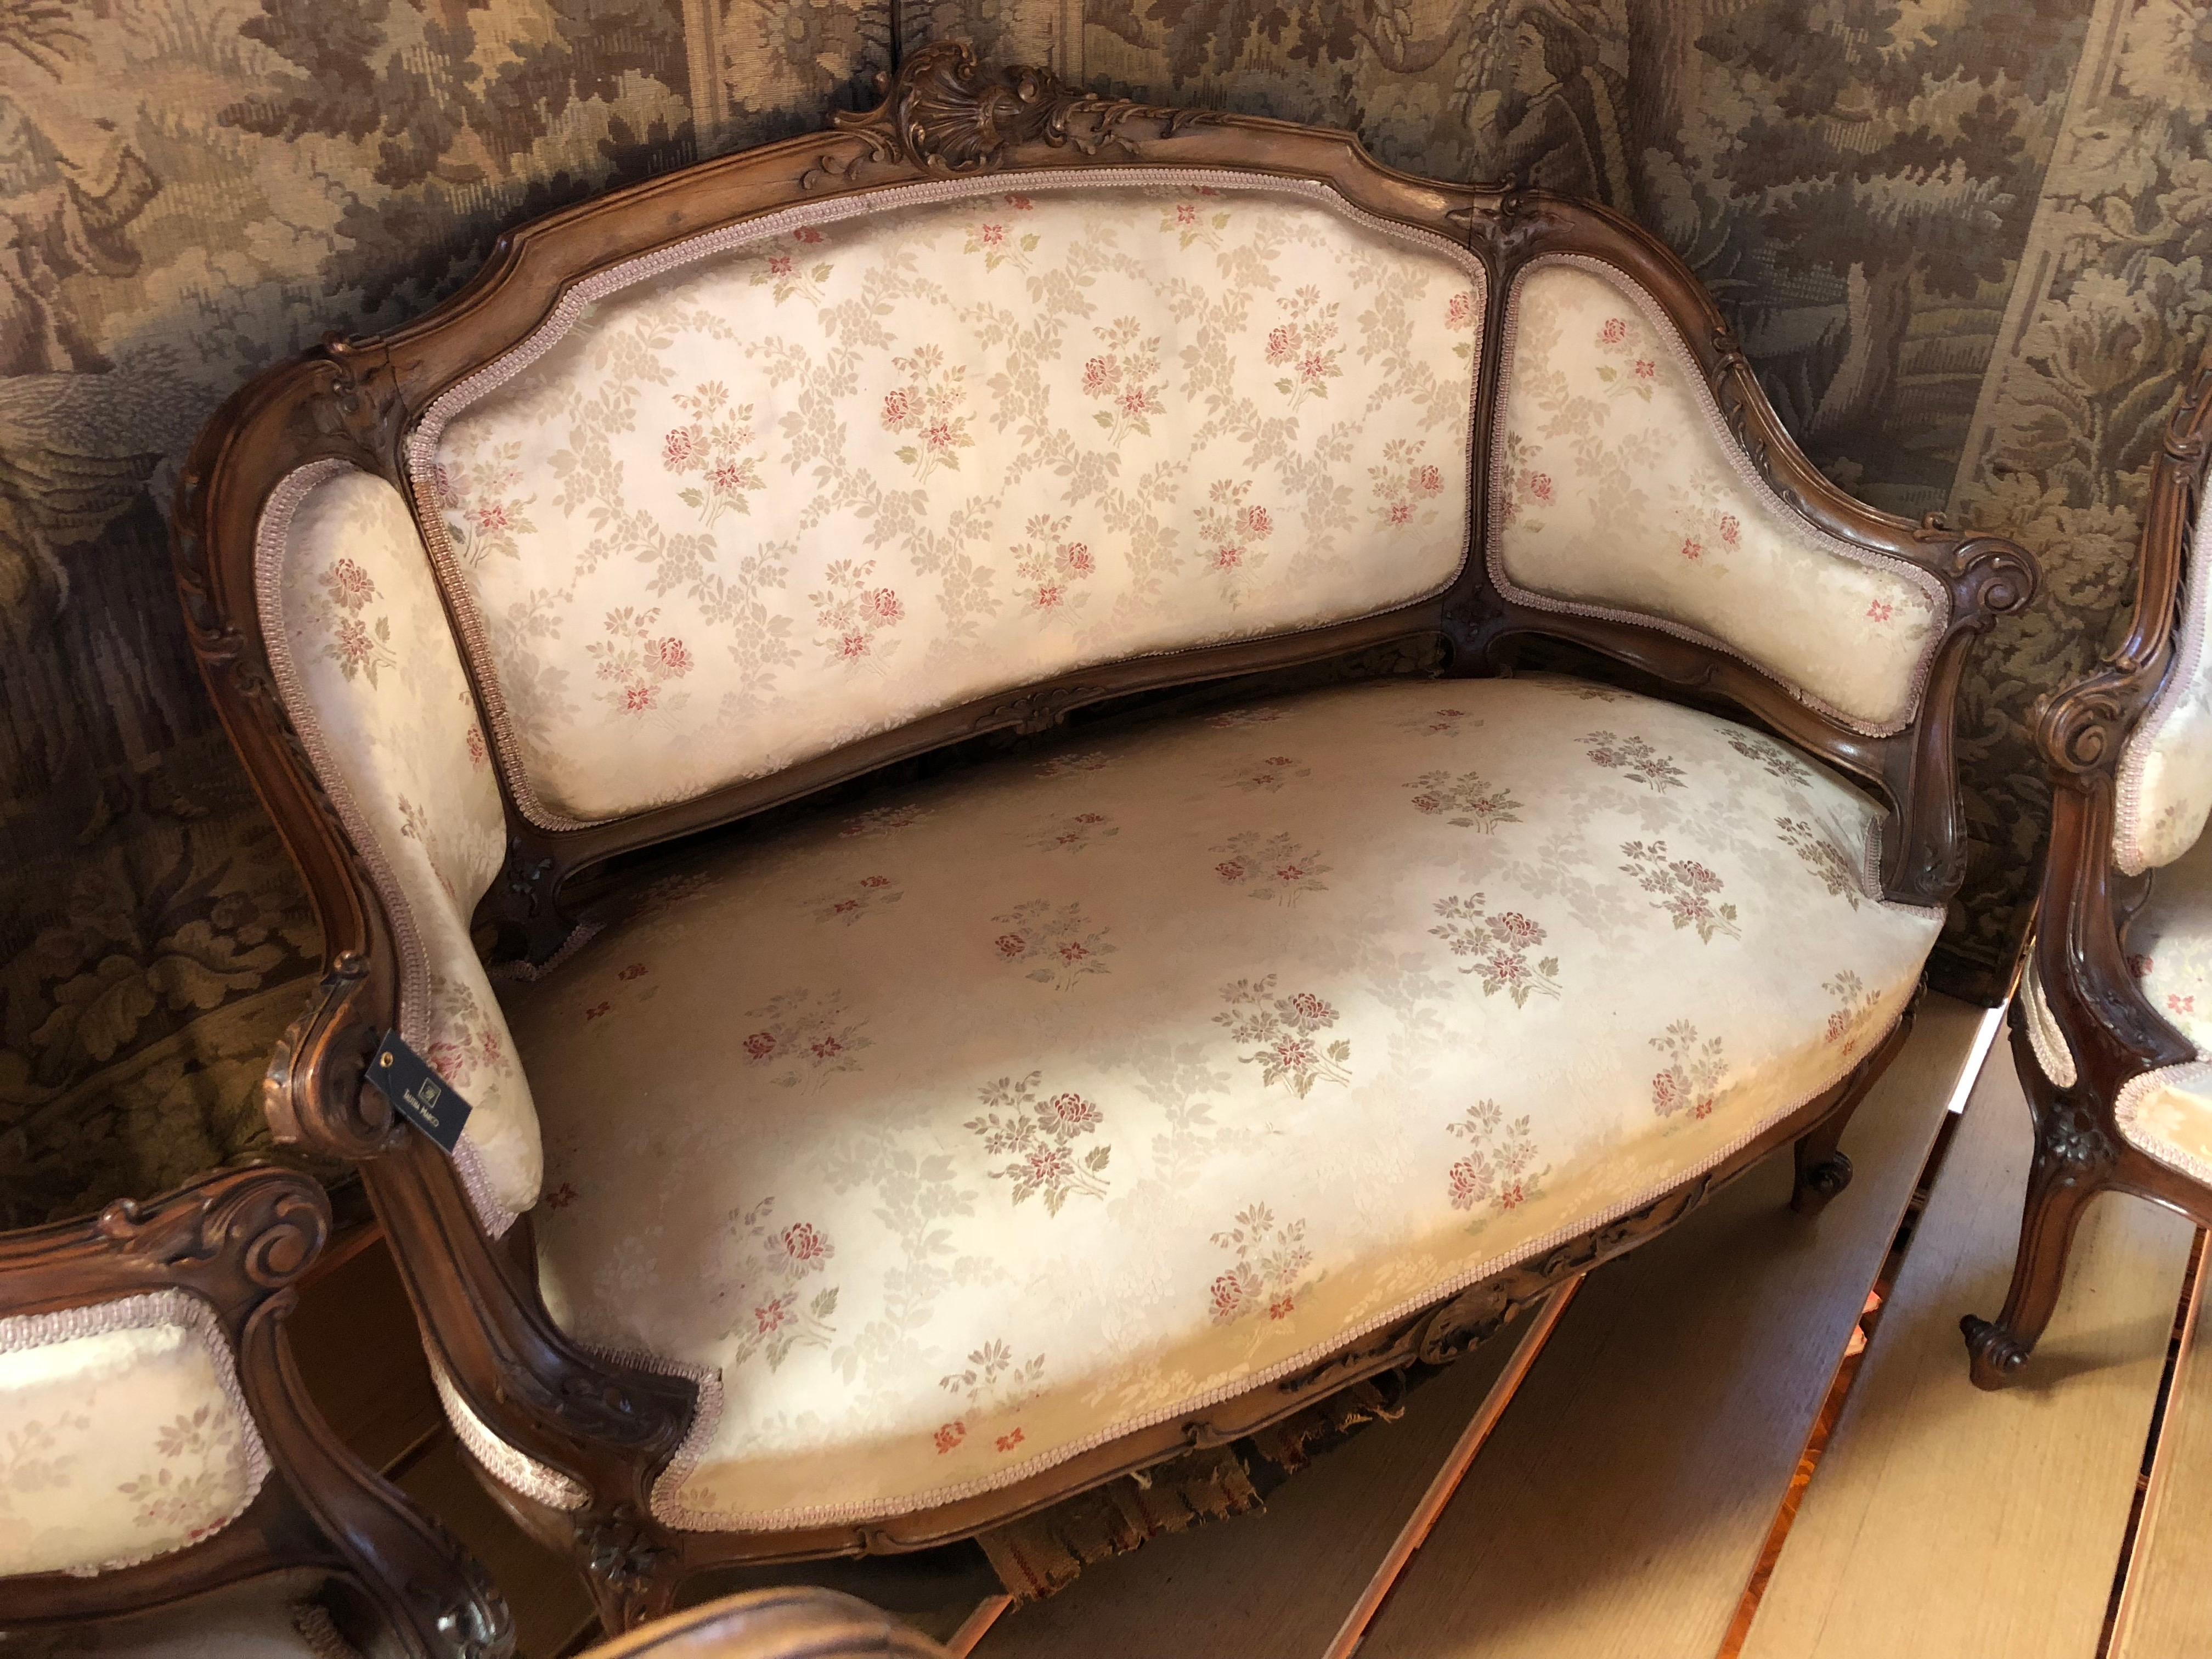 Direct from Paris, this charming five piece French salon set features, one settee, two arm chairs and two petit side chairs. Original fleur silk upholstery creates an utter feminine touch to the set, and walnut frames add to the chairs' luxurious